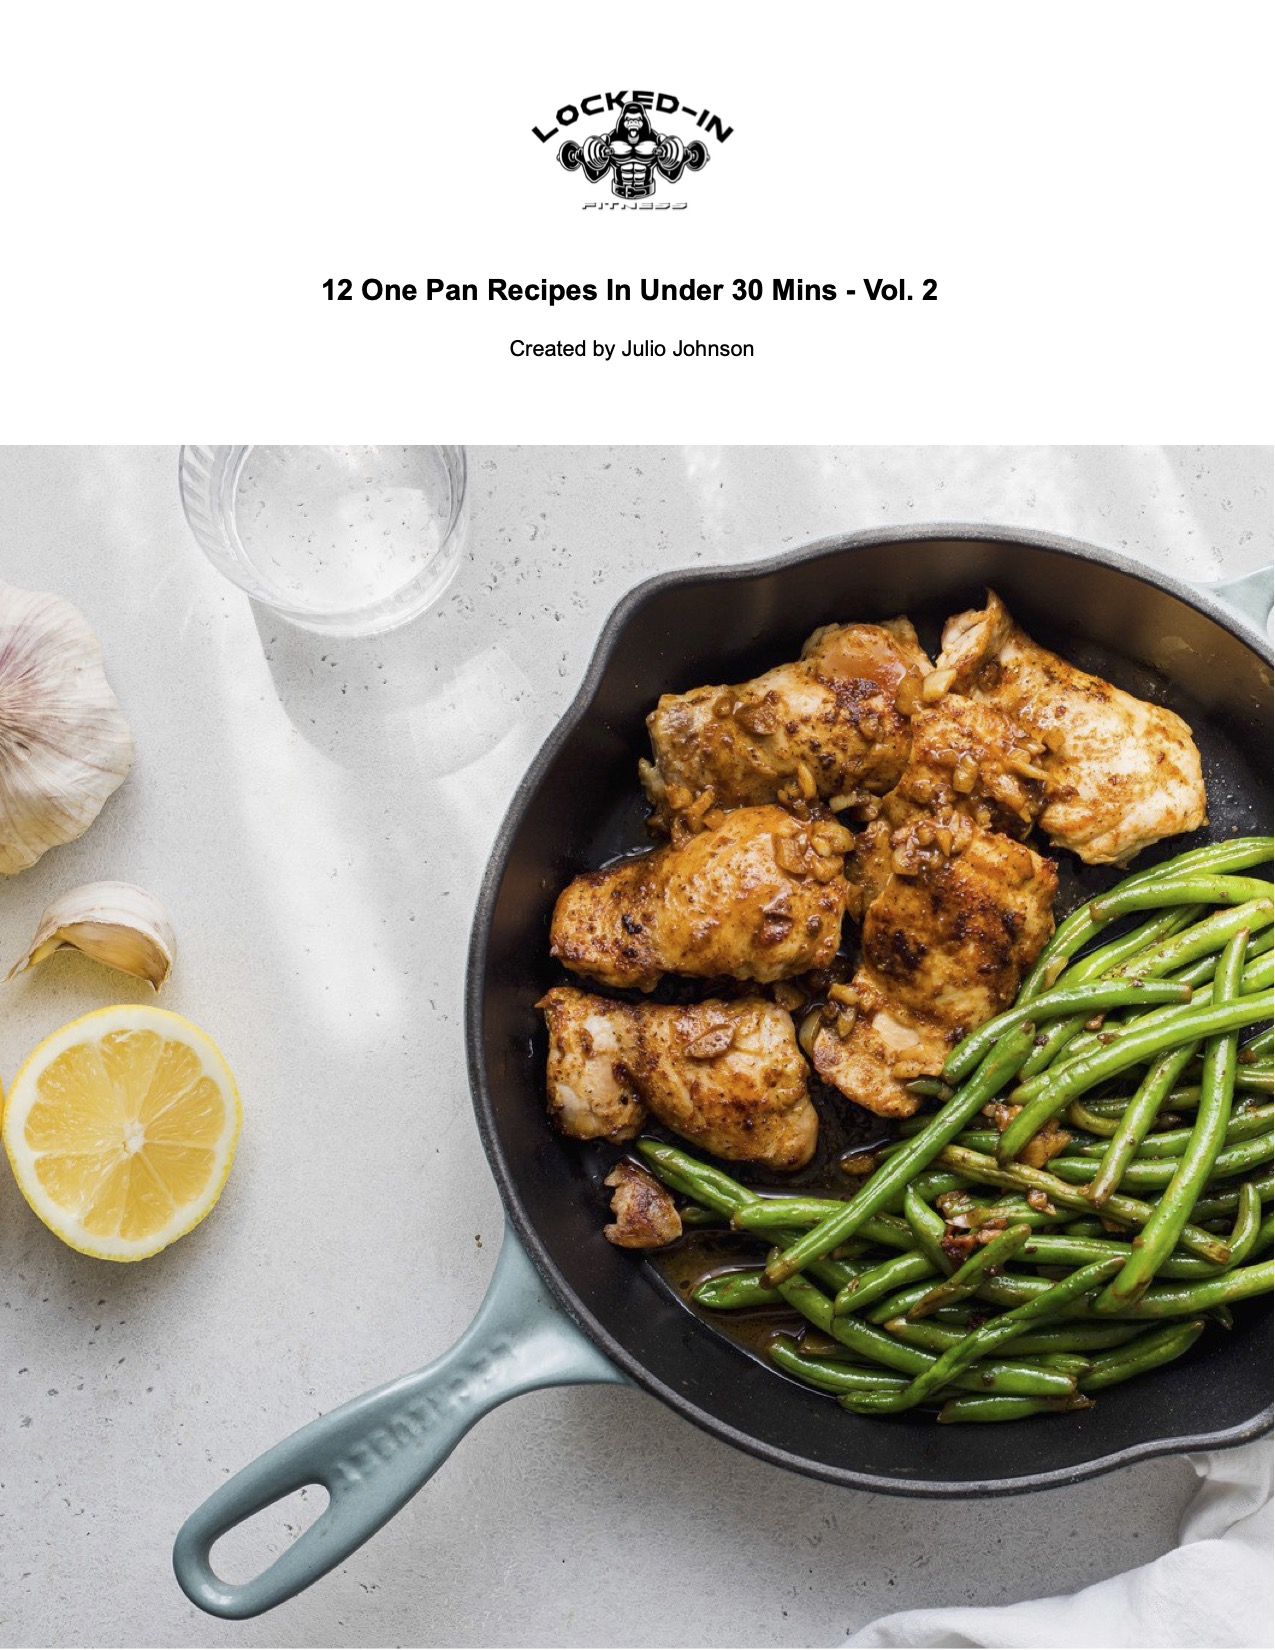 01-12-one-pan-recipes-in-under-30-mins-vol-2